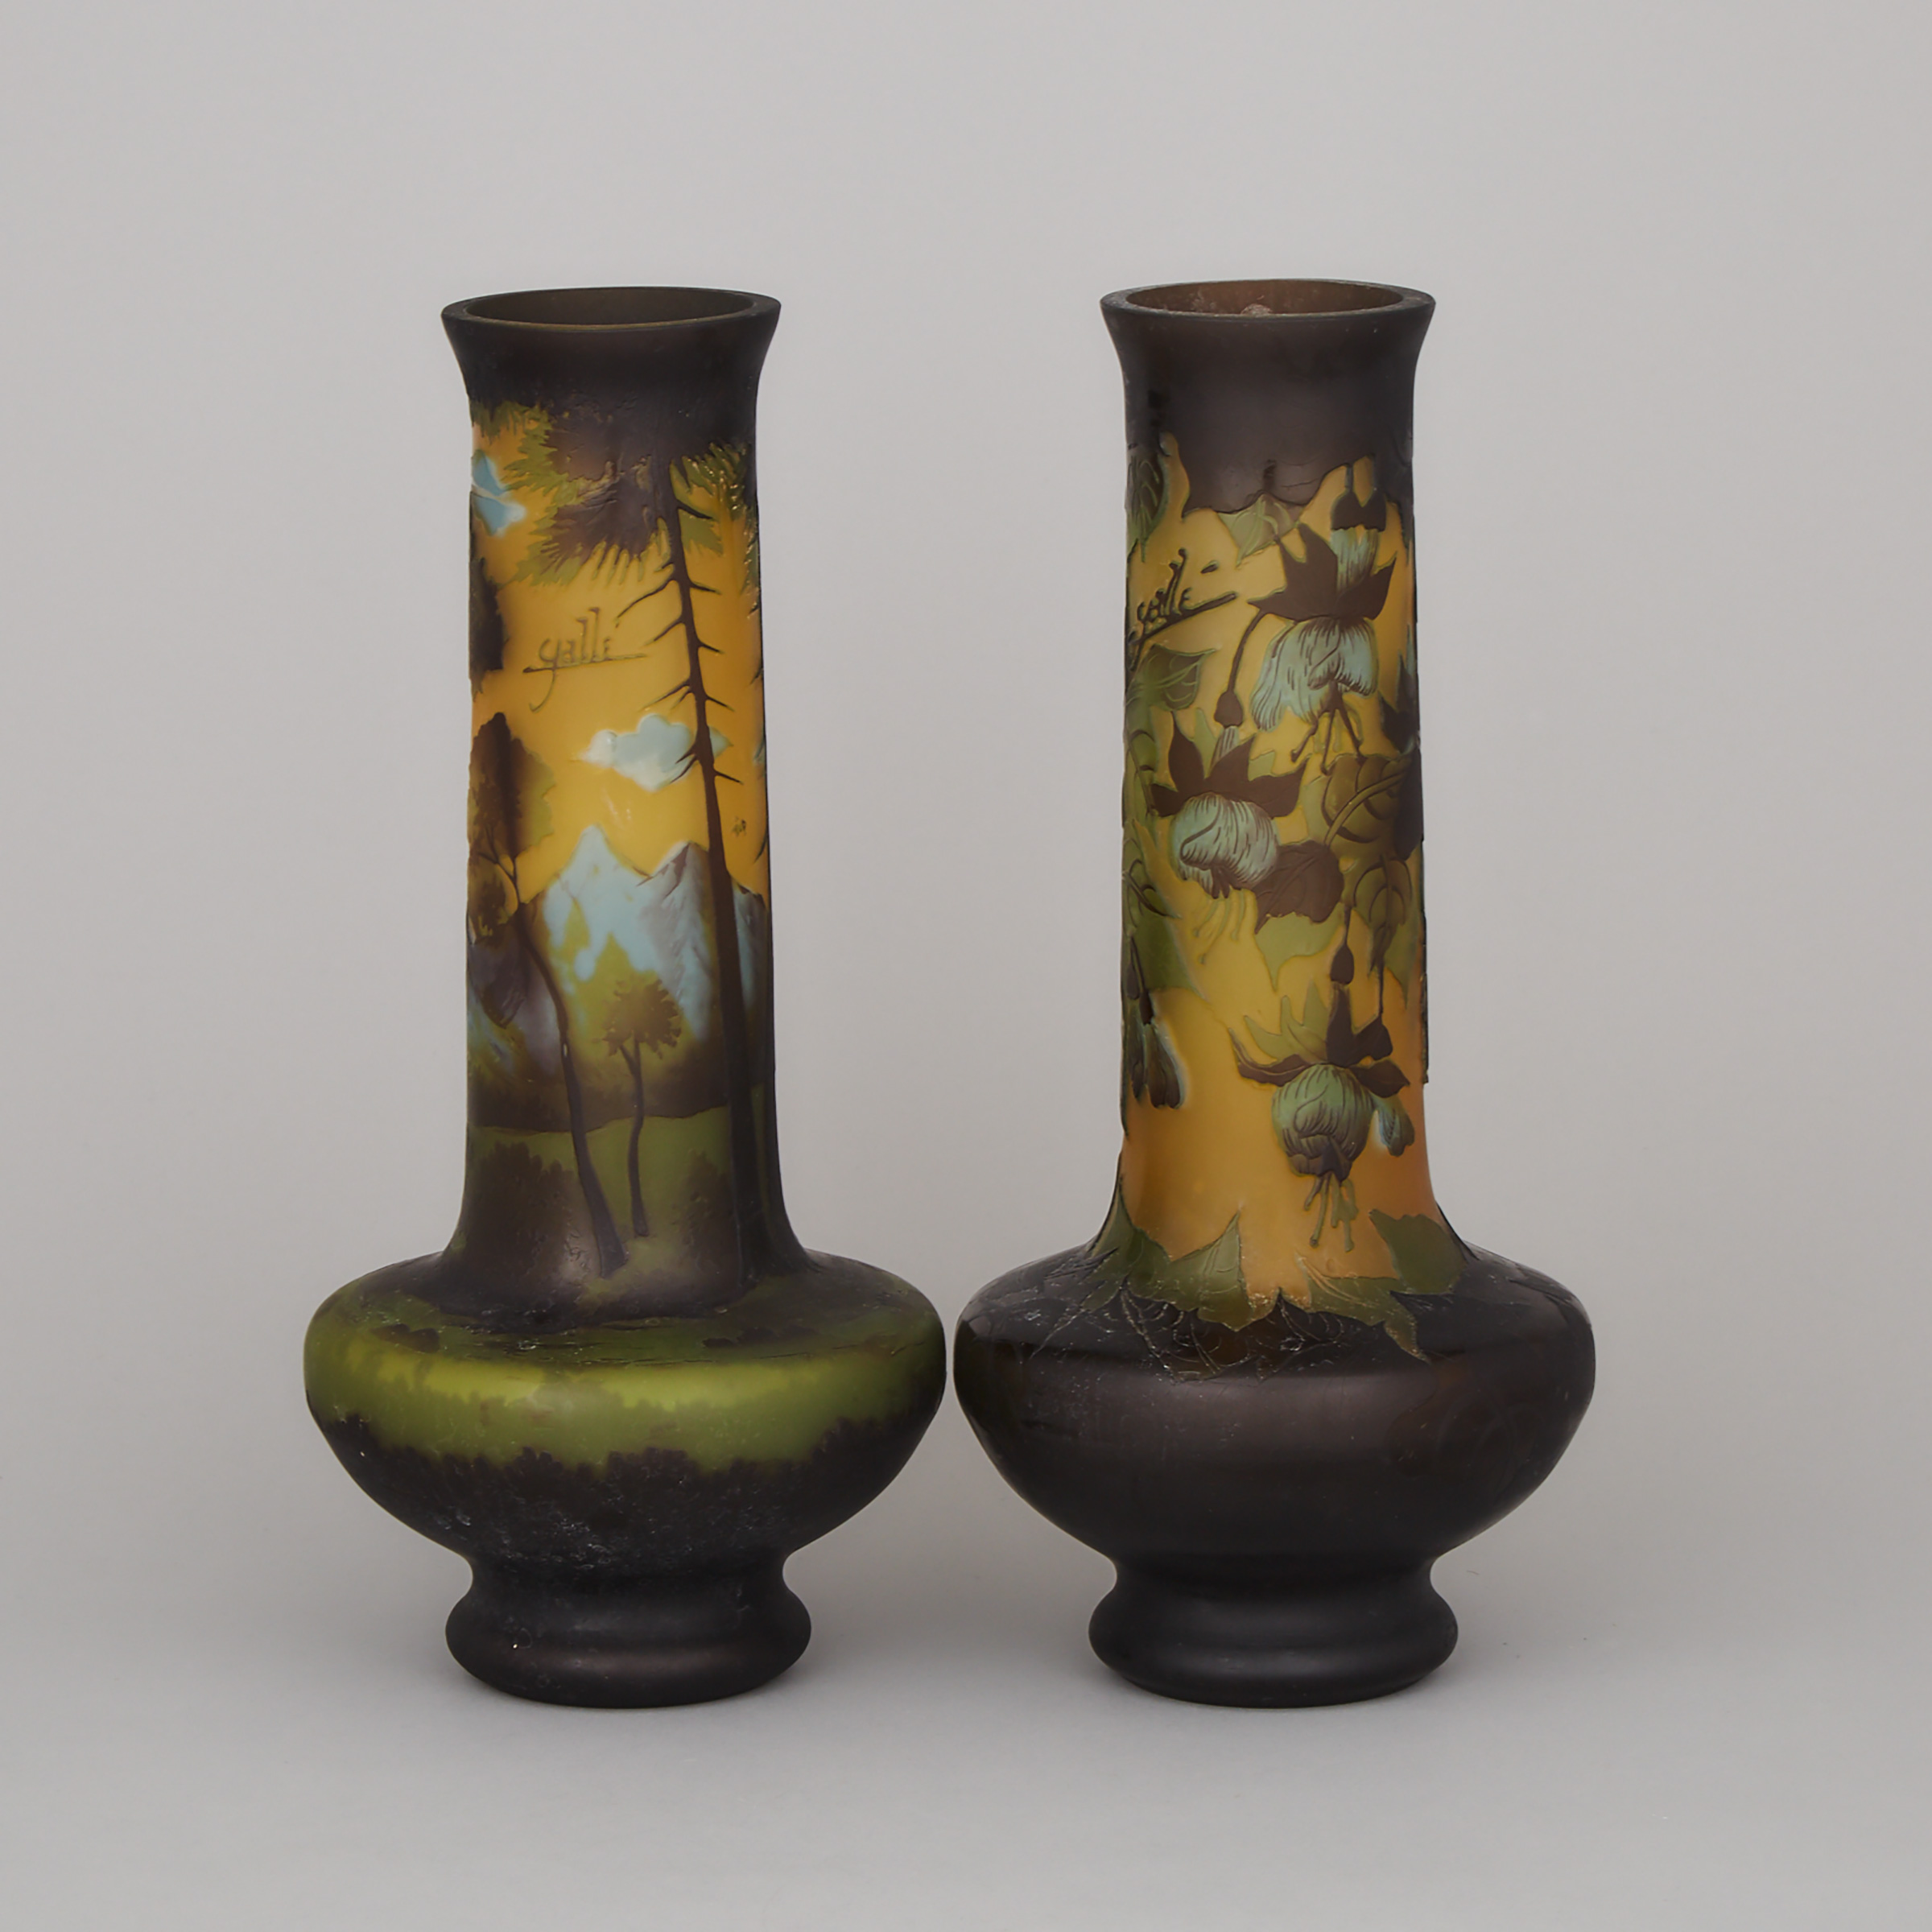 Two Romanian Gallé-Style Cameo Glass Vases, late 20th century